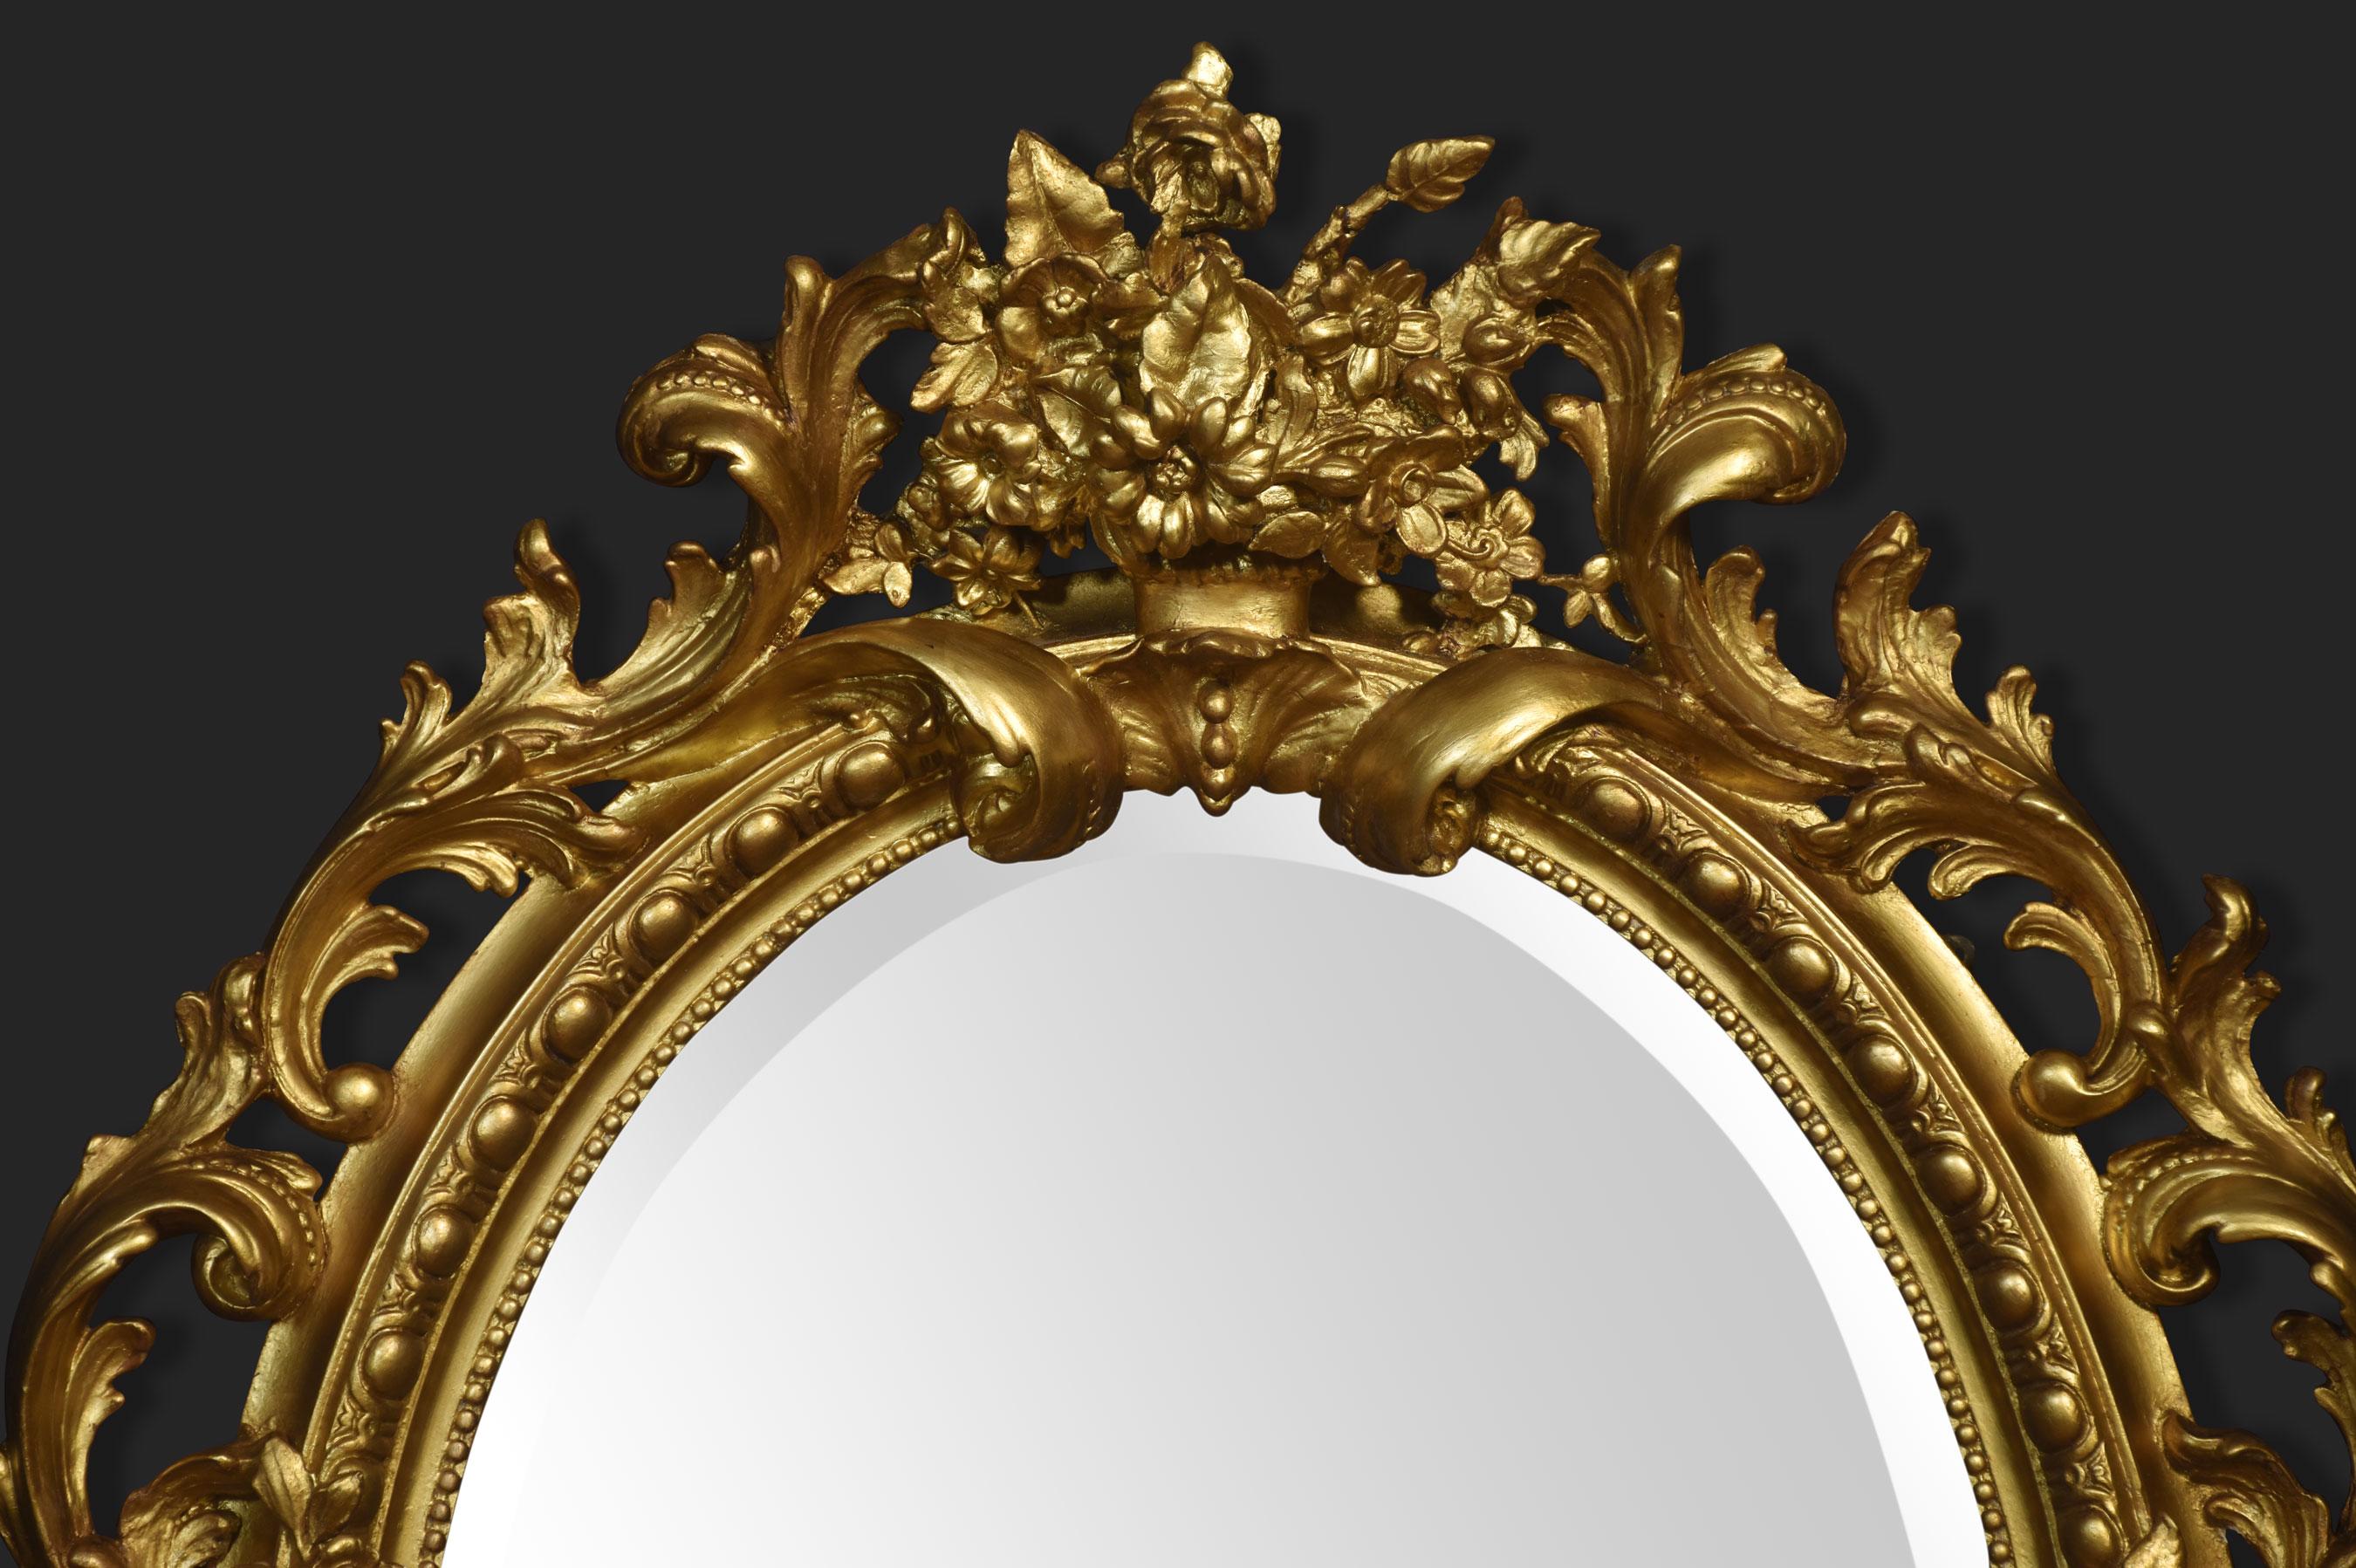 Very large early 19th-century wall mirror, the well-carved frame decorated with foliated and scrolling detail surrounding the original oval beveled mirror plate.
Dimensions
Height 51 Inches
Width 42 Inches
Depth 8 Inches